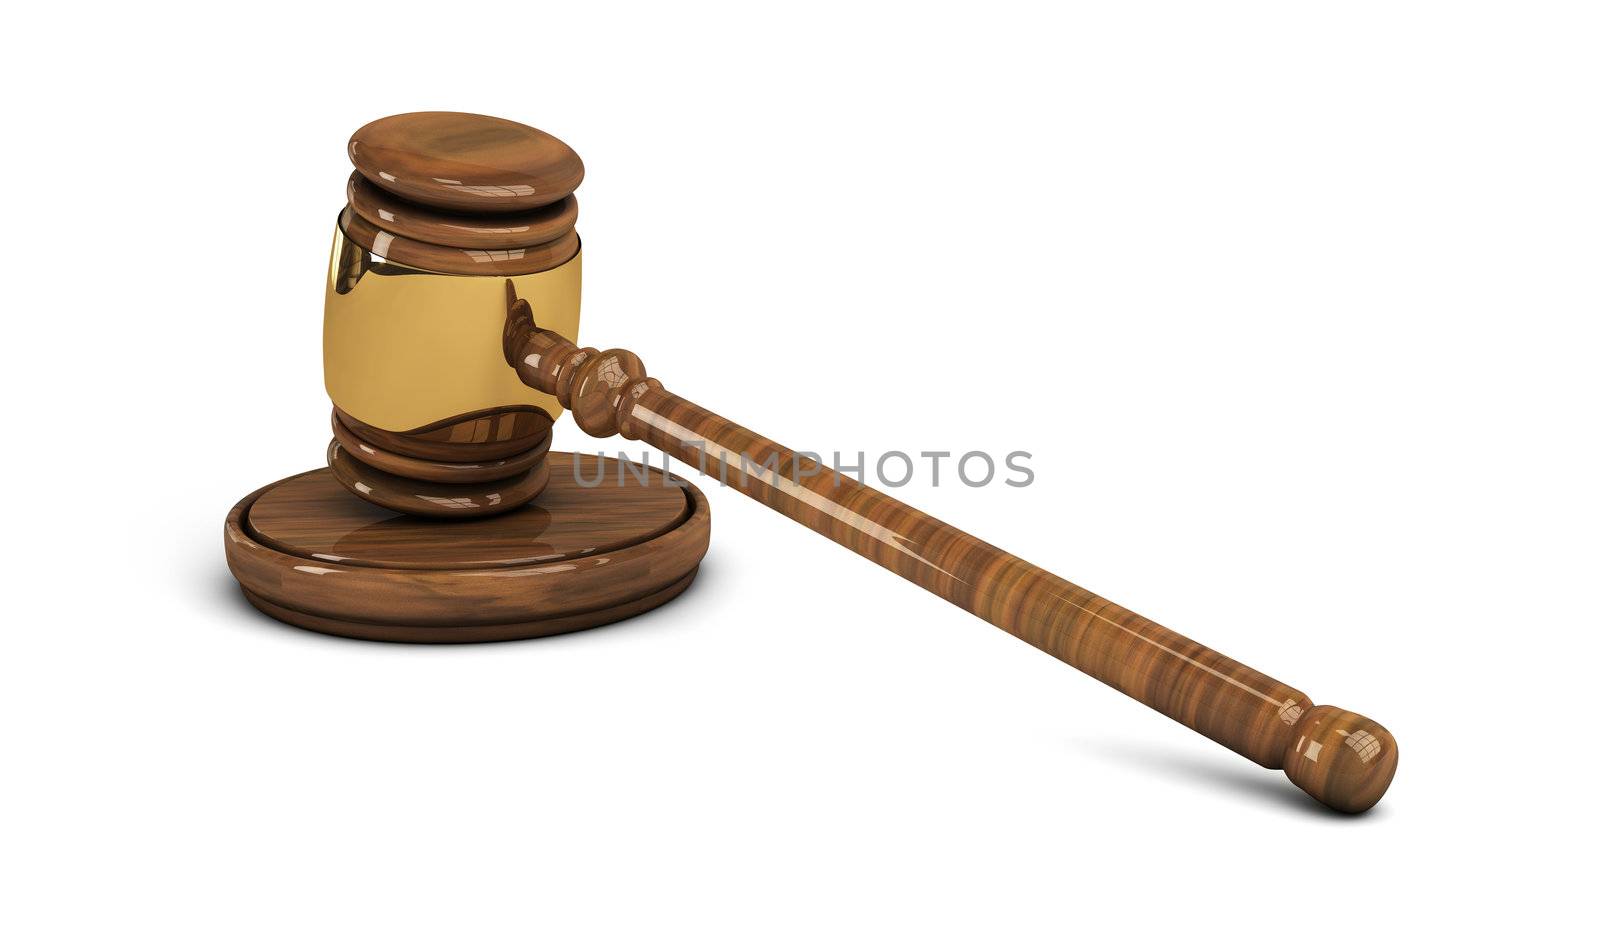 Wooden gavel with brass rim, legal set on white